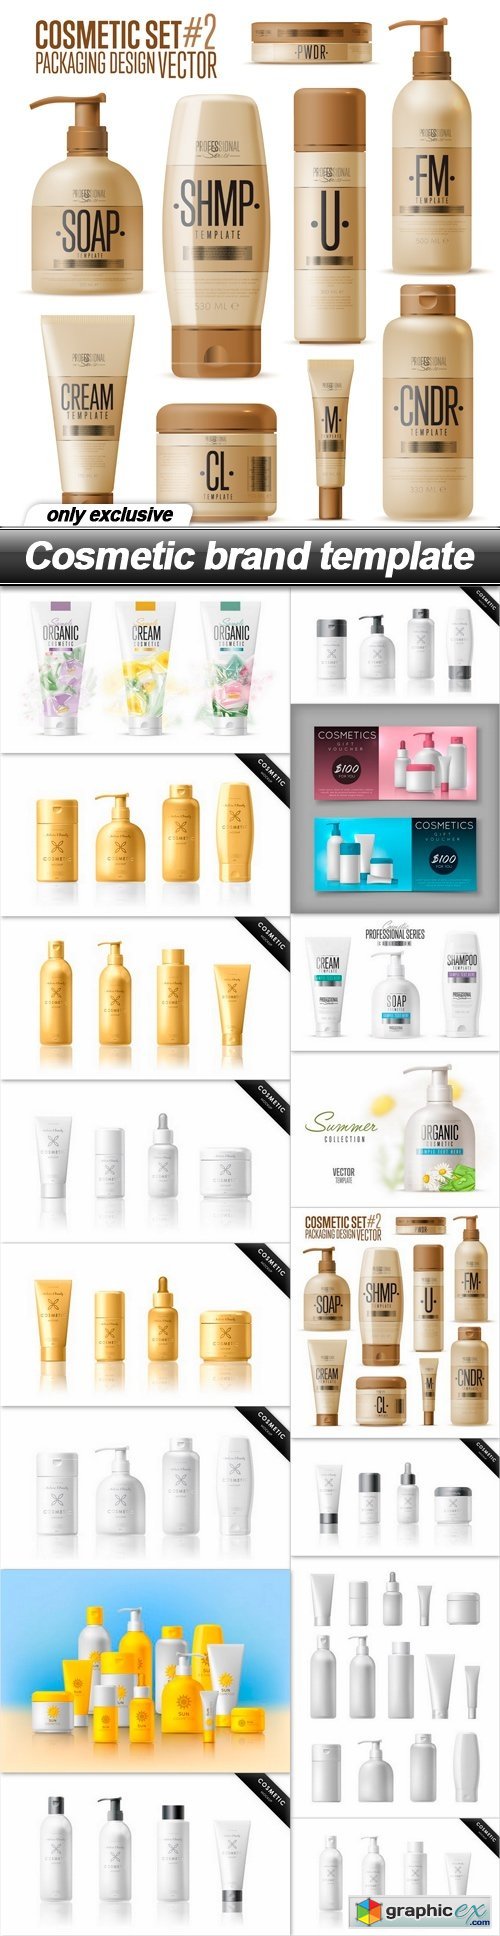 Cosmetic brand template - 16 EPS